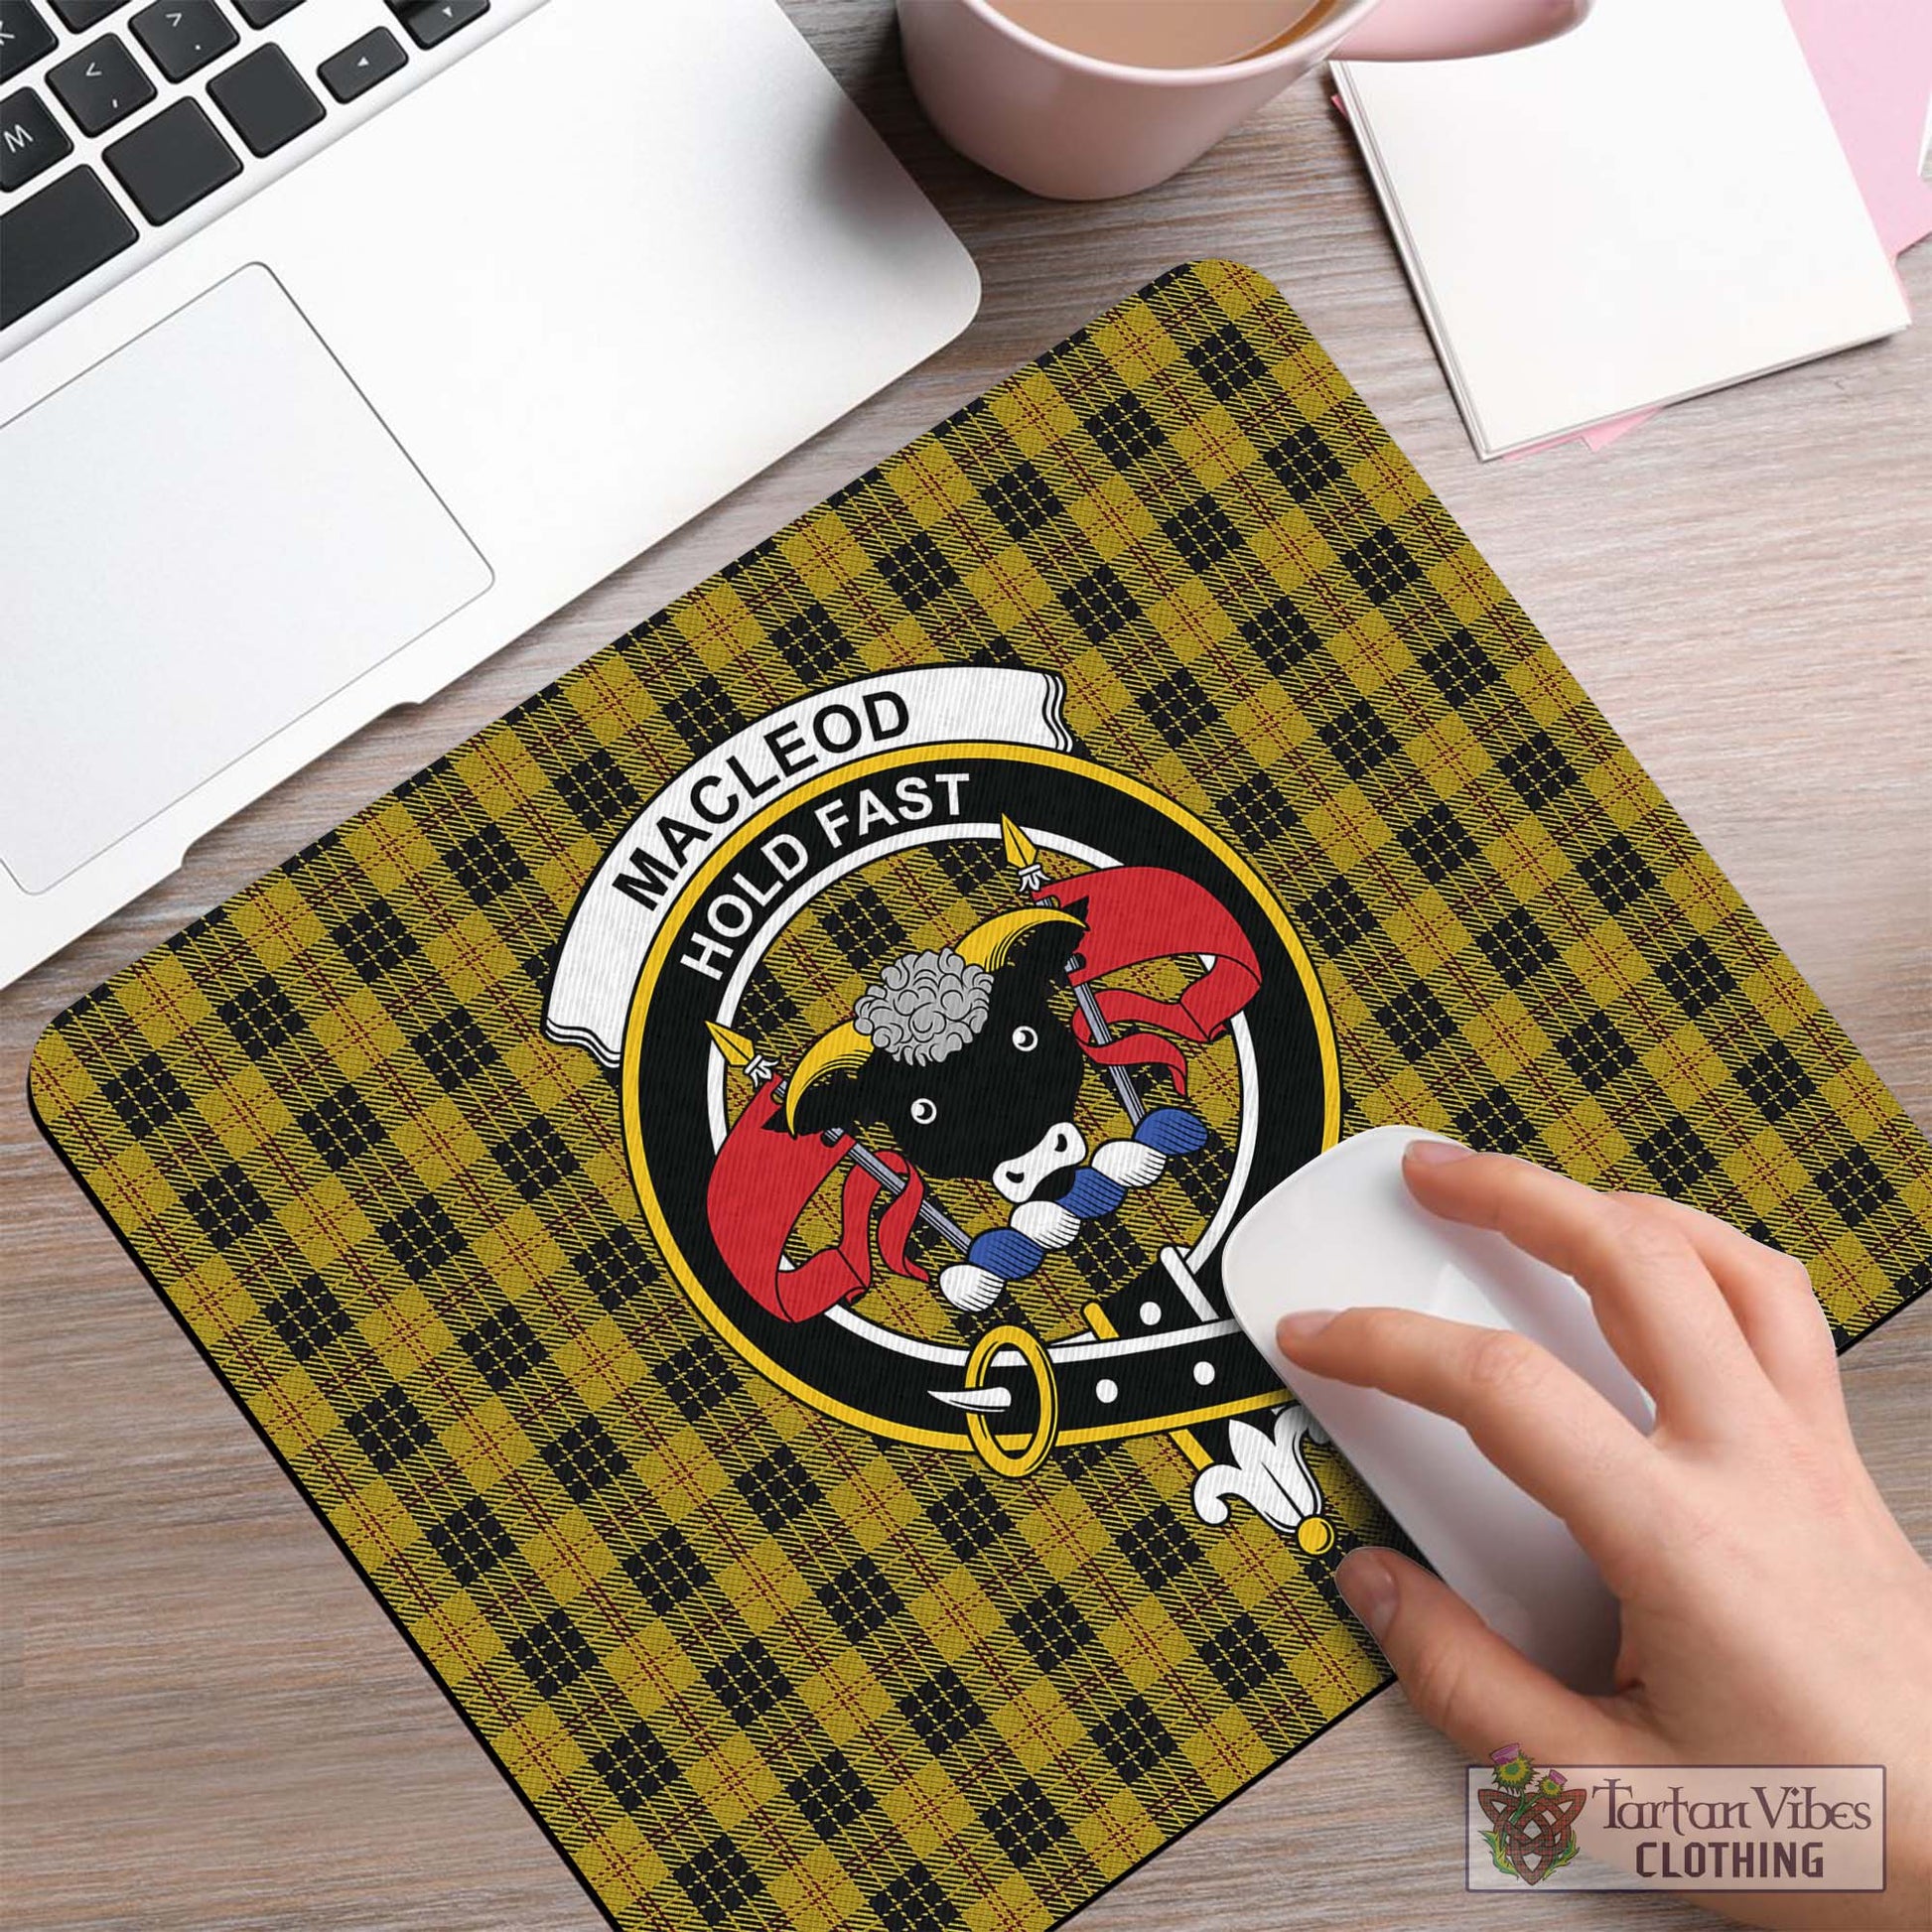 Tartan Vibes Clothing MacLeod Tartan Mouse Pad with Family Crest